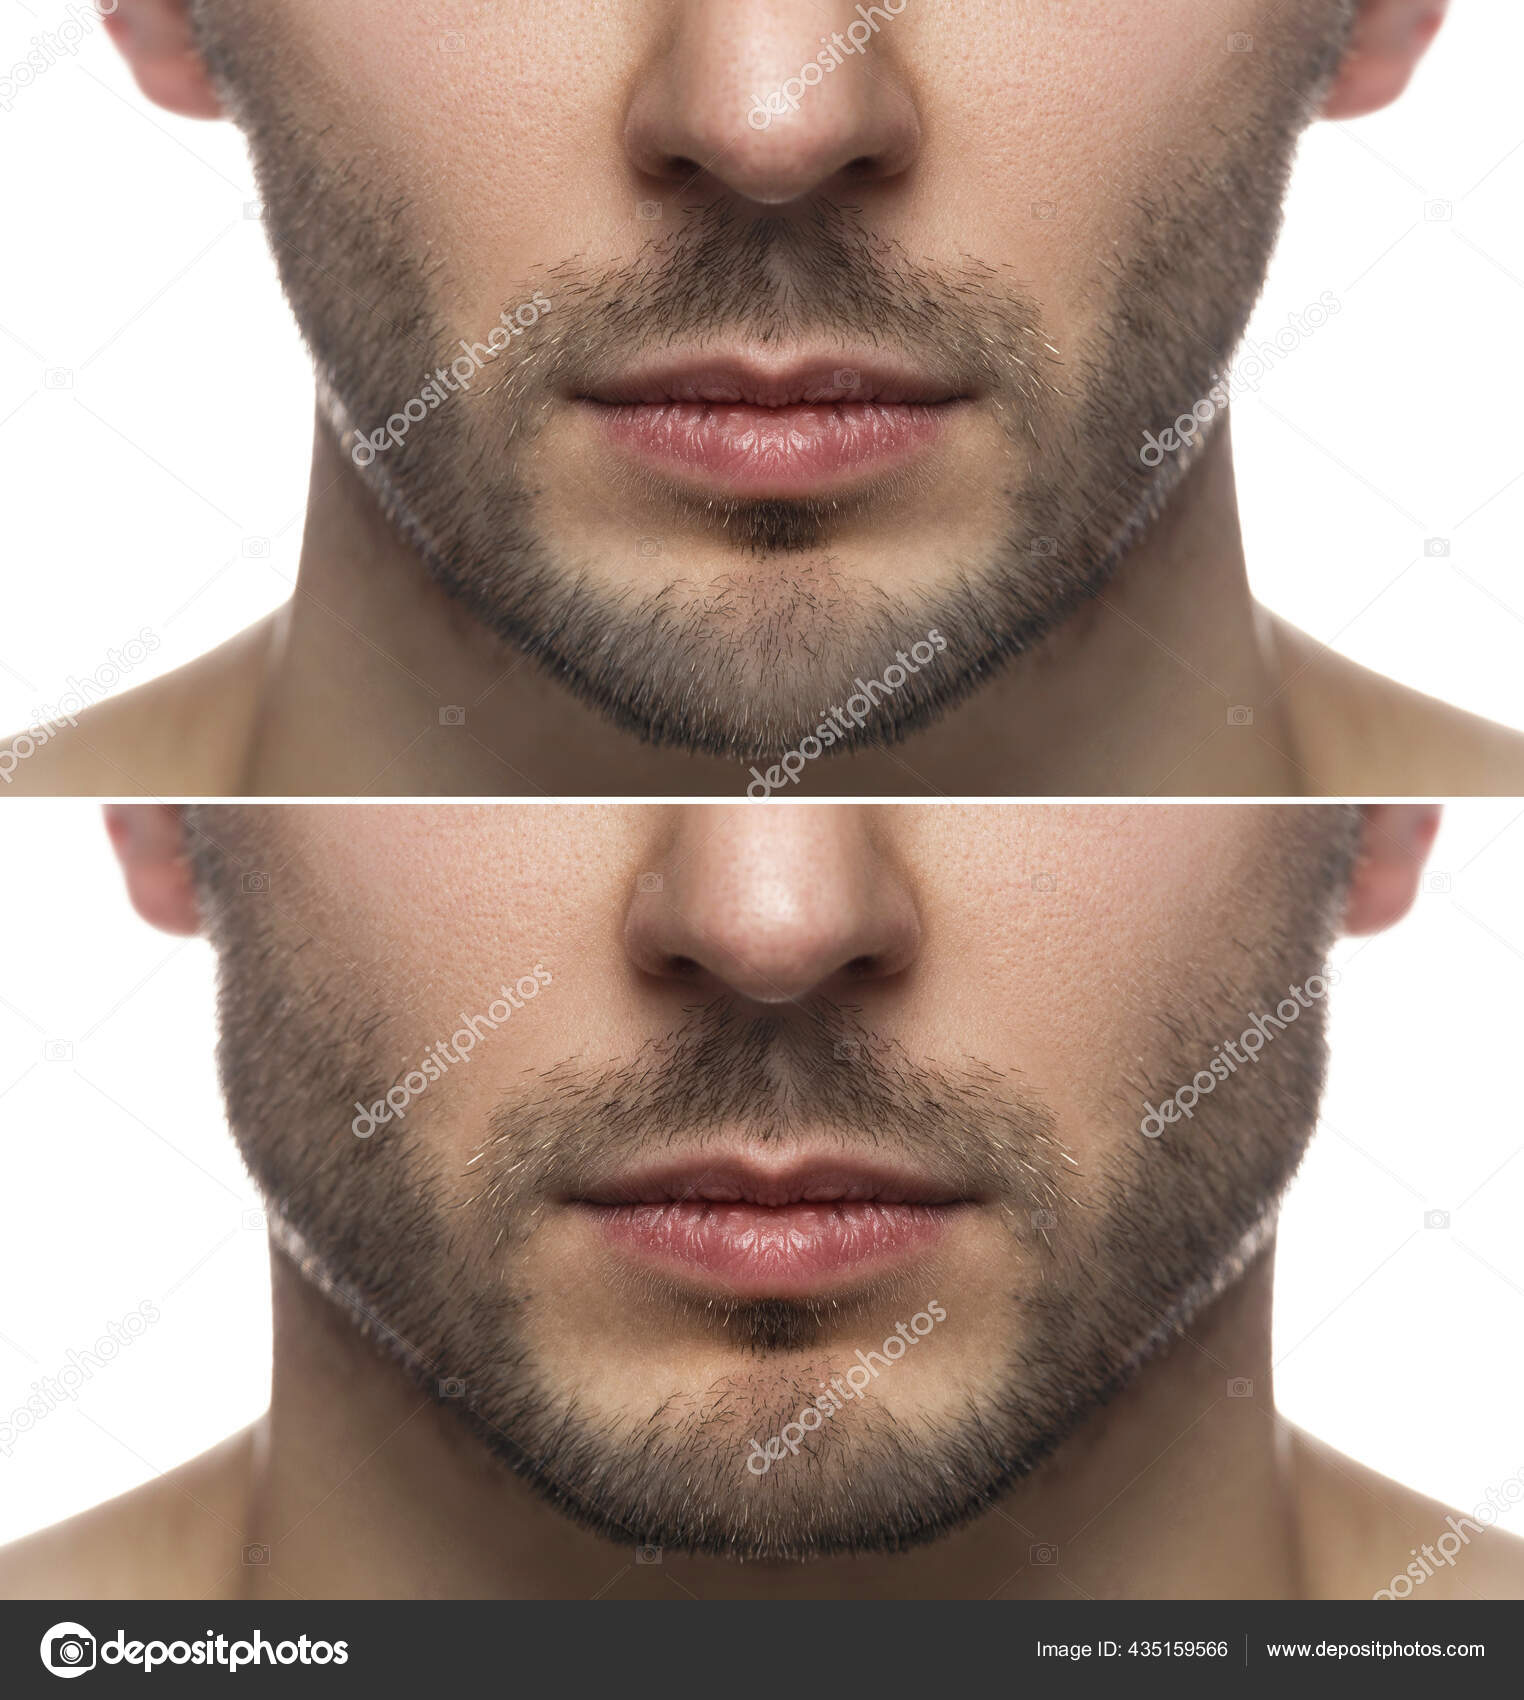 Surgery Mewing Exercises Result Jawline Reshape Stock Photo by ©AY_PHOTO  435159566